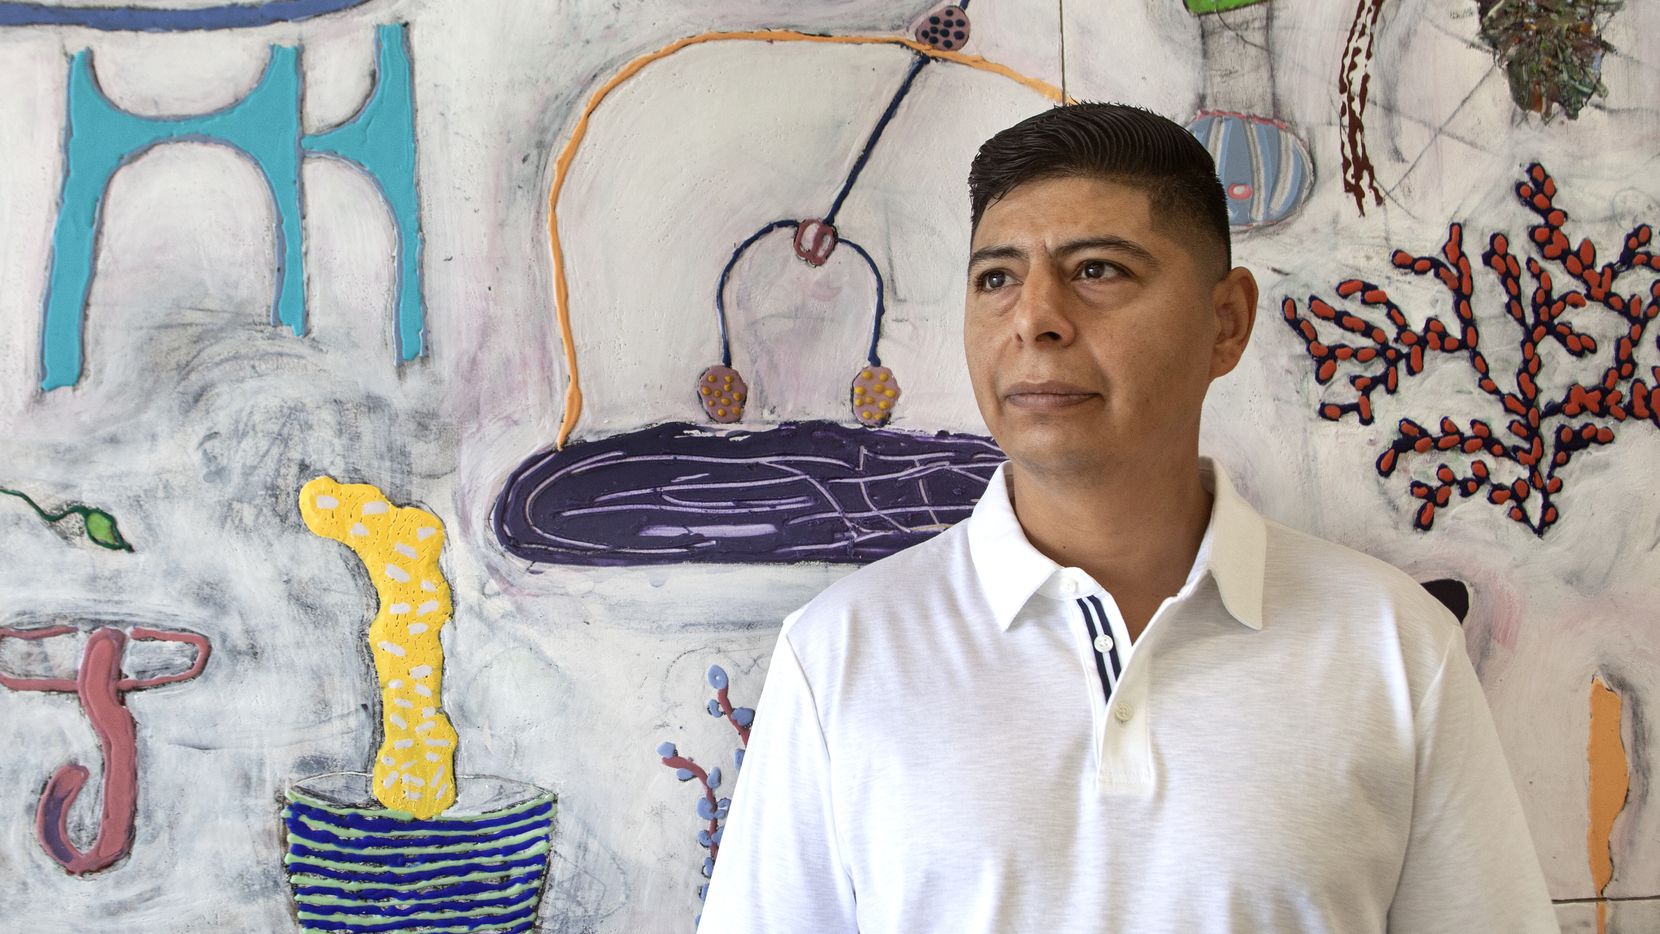 John Miranda, photographed at his exhibition "Movidas: New Work" at Cluley Projects, quit his job as an elementary school teacher to pursue a career as an artist. "I want to make a living out of what I like doing," he says. "Hopefully that will happen.”